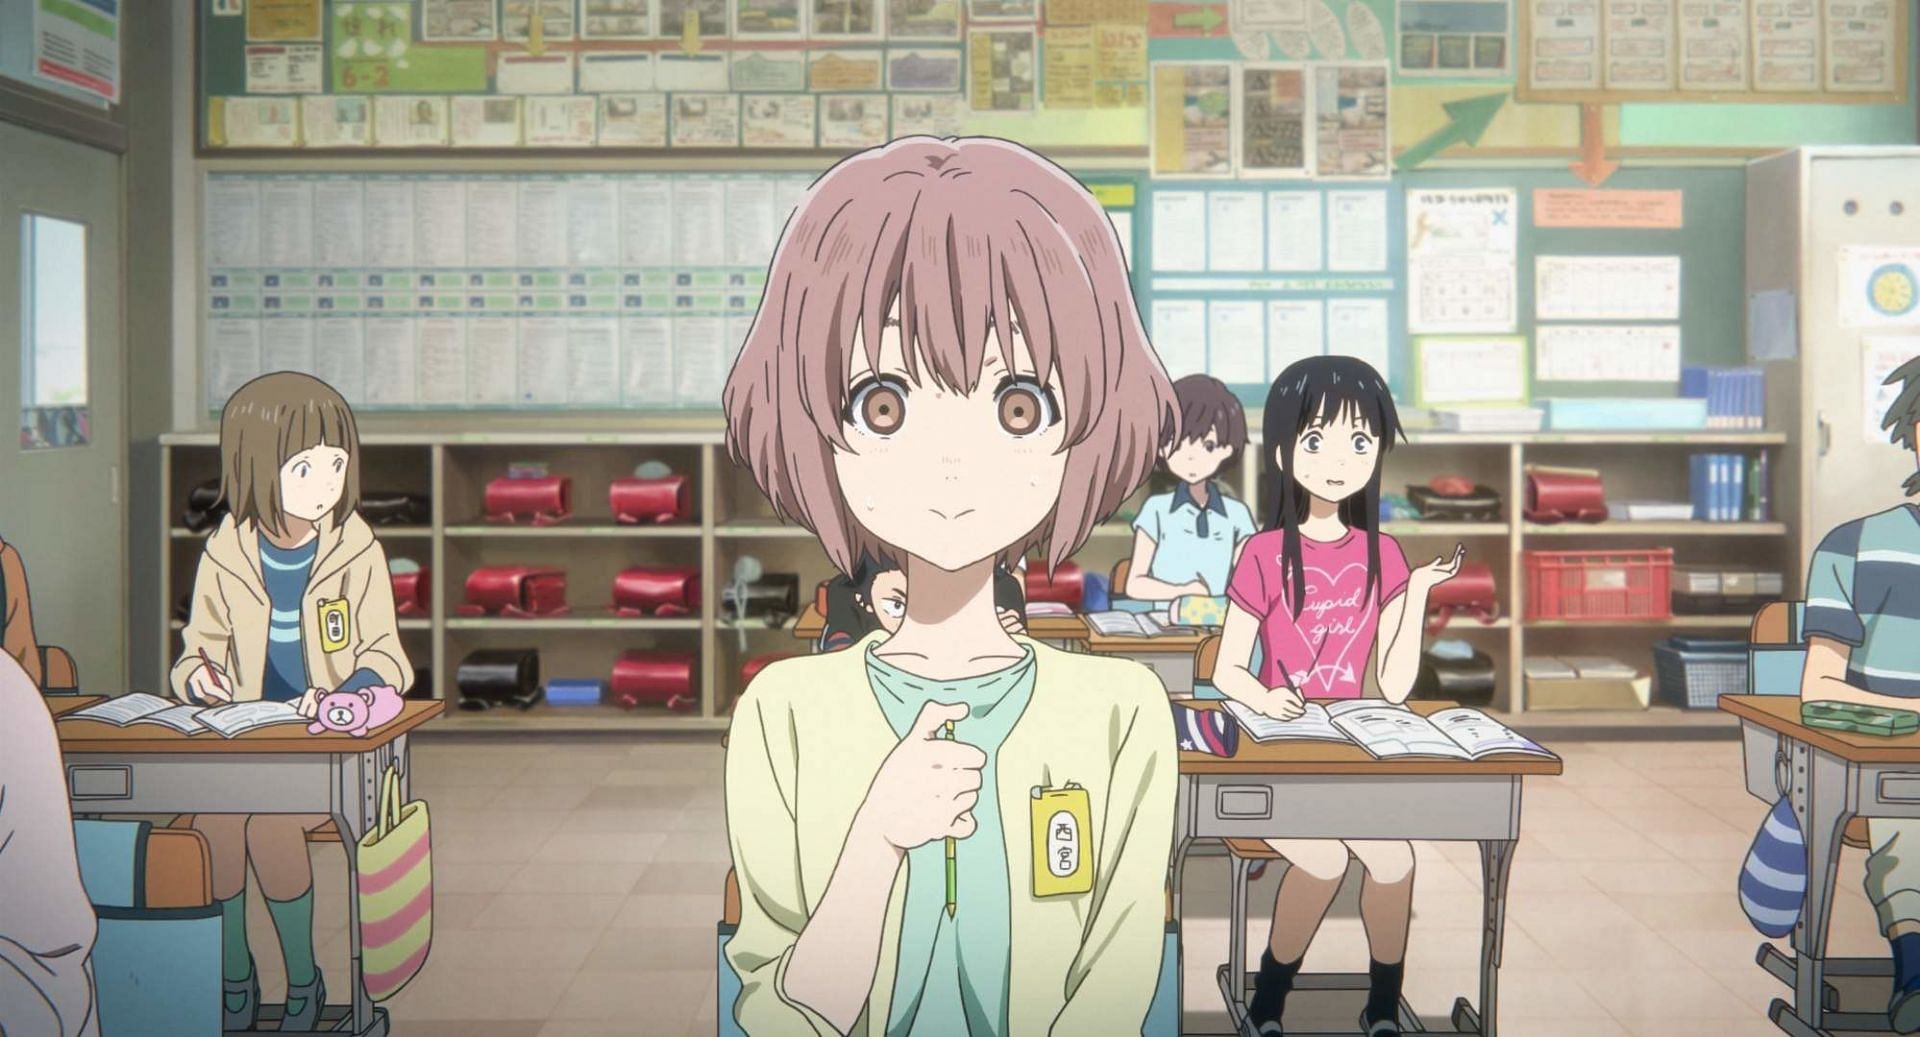 A Silent Voice The Movie streaming watch online